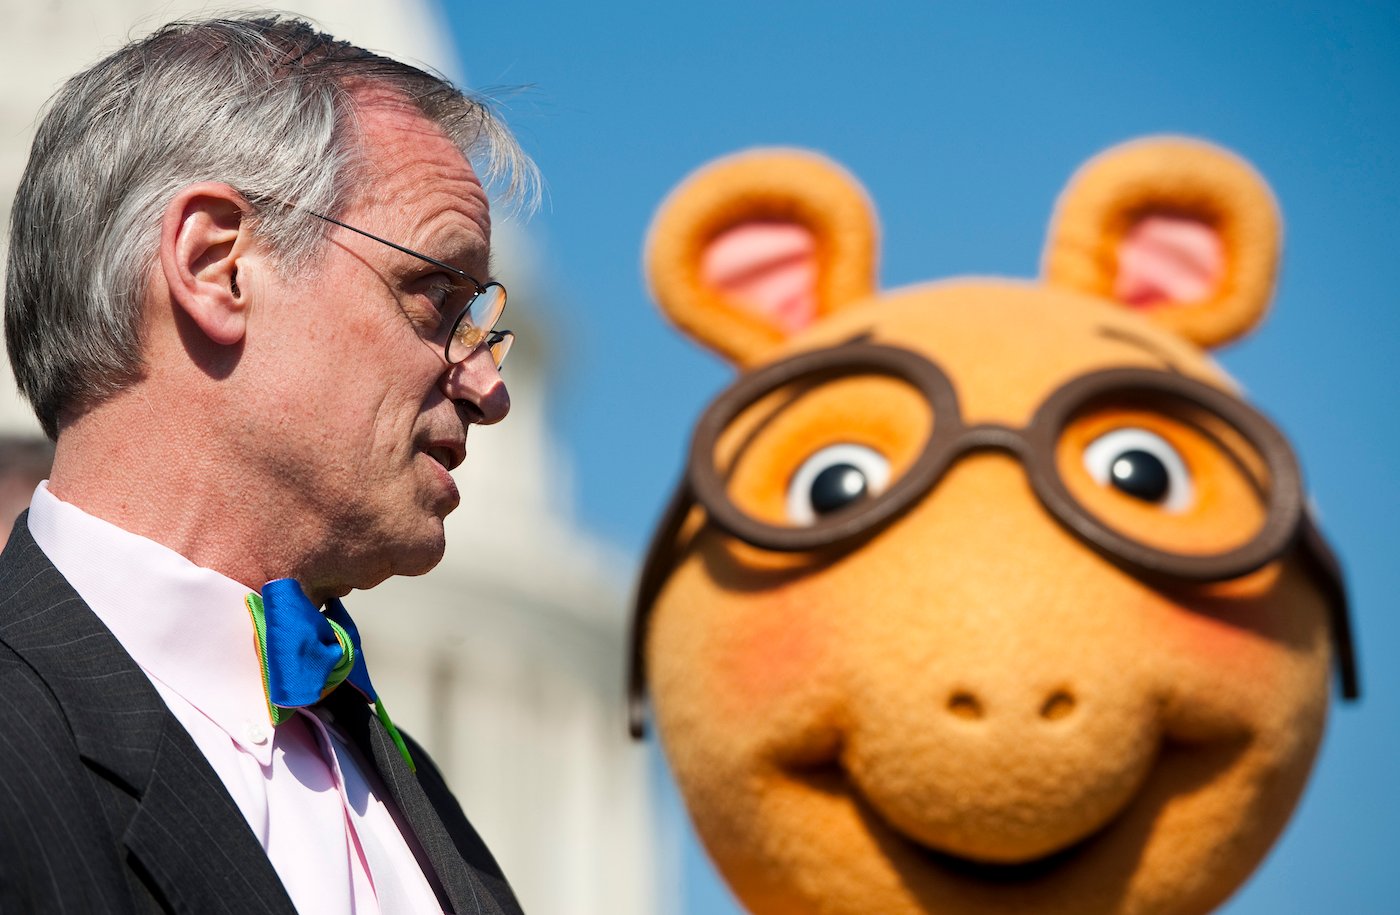 Rep. Earl Blumenauer (D-Ore) and Arthur, the aardvark from PBS Kids, participate in a news conference to announce efforts to oppose defunding of the Corporation for Public Broadcasting in 2011